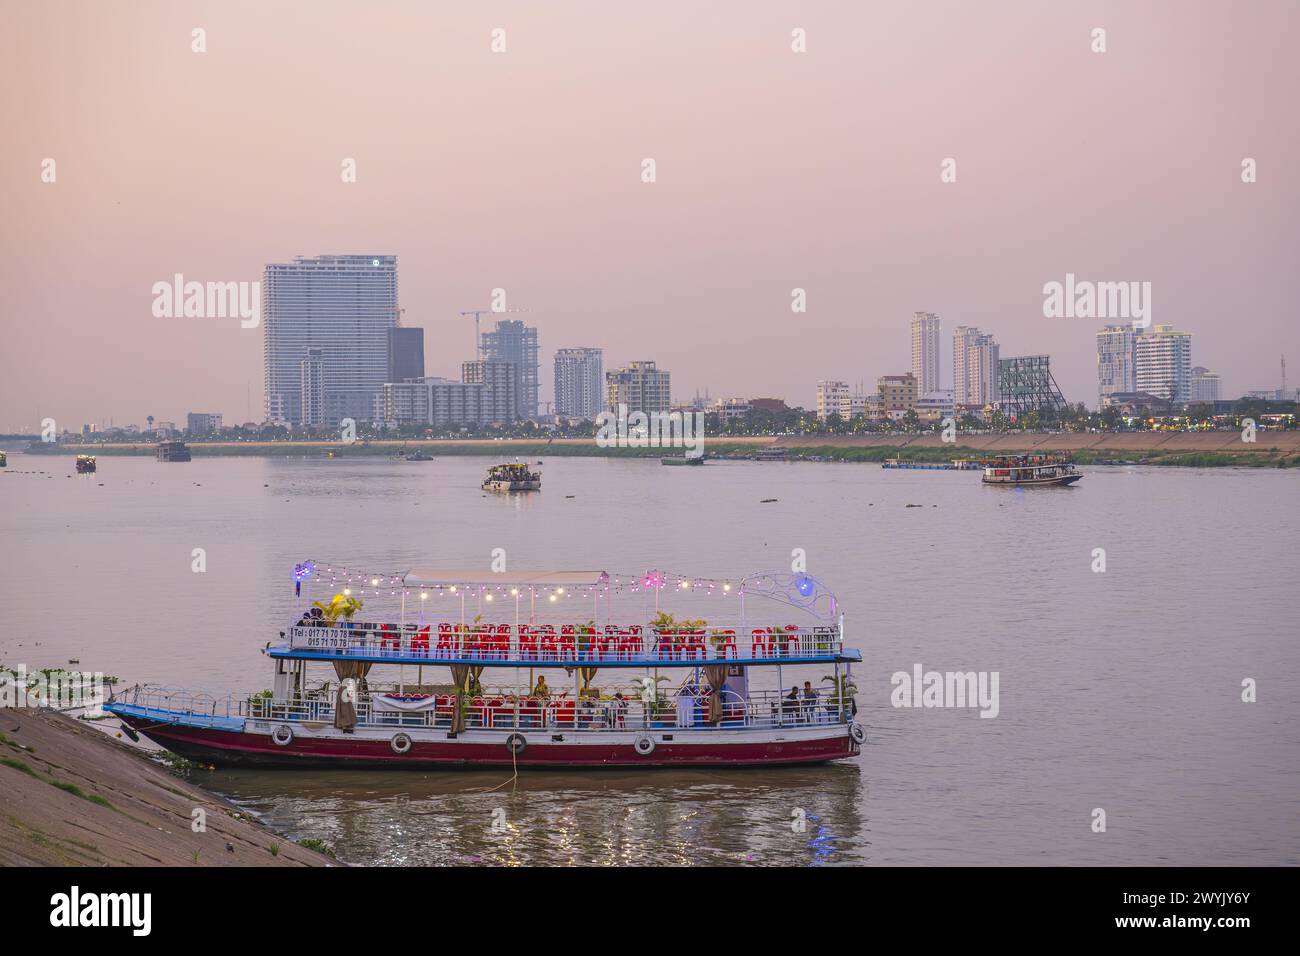 Cambodia, Phnom Penh, tourist boat on the Tonle Sap river and the buildings of the Chroy Changvar district Stock Photo